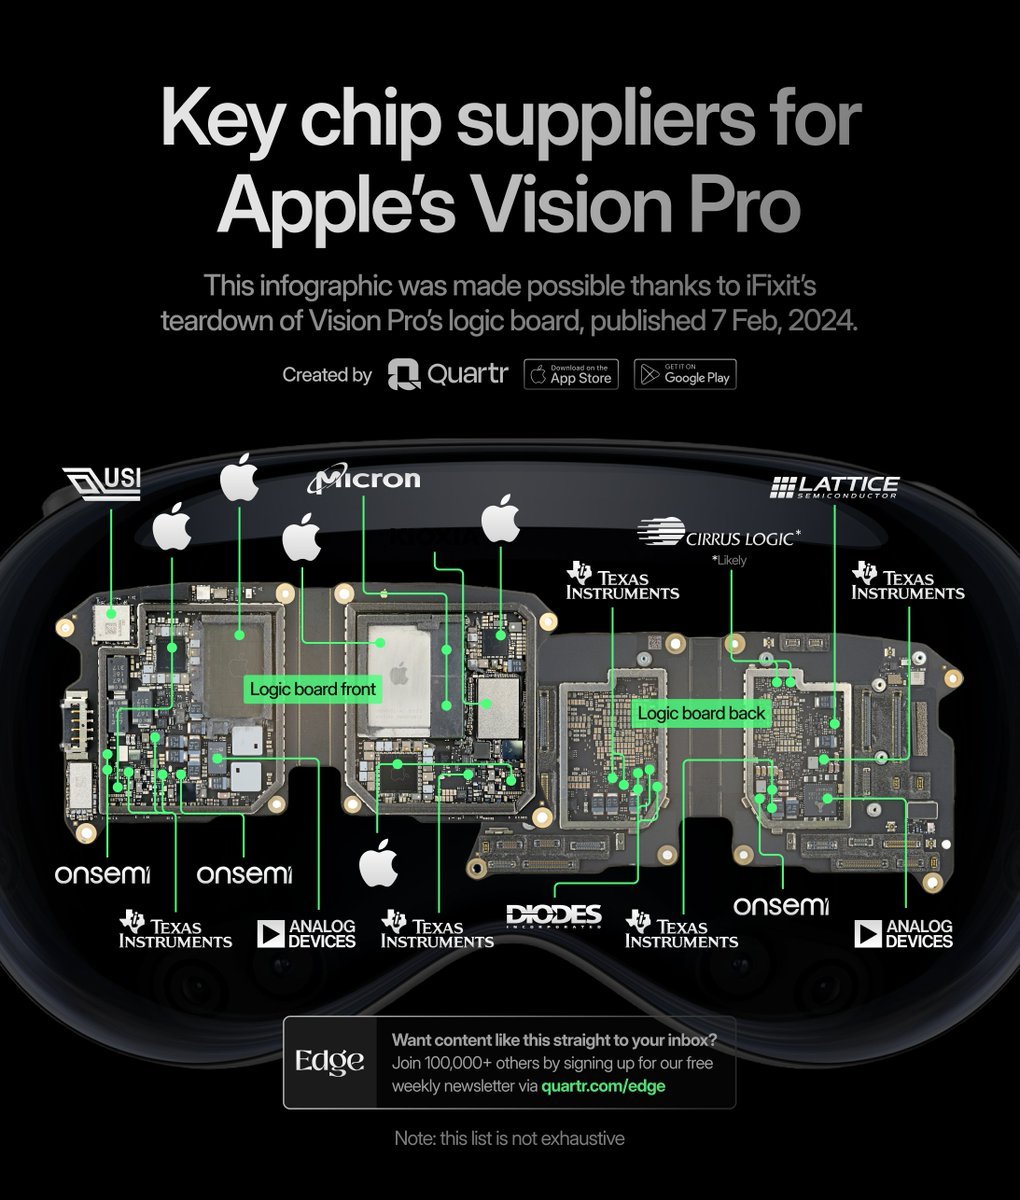 Here are some of the key semiconductor suppliers for Apple's $AAPL Vision Pro